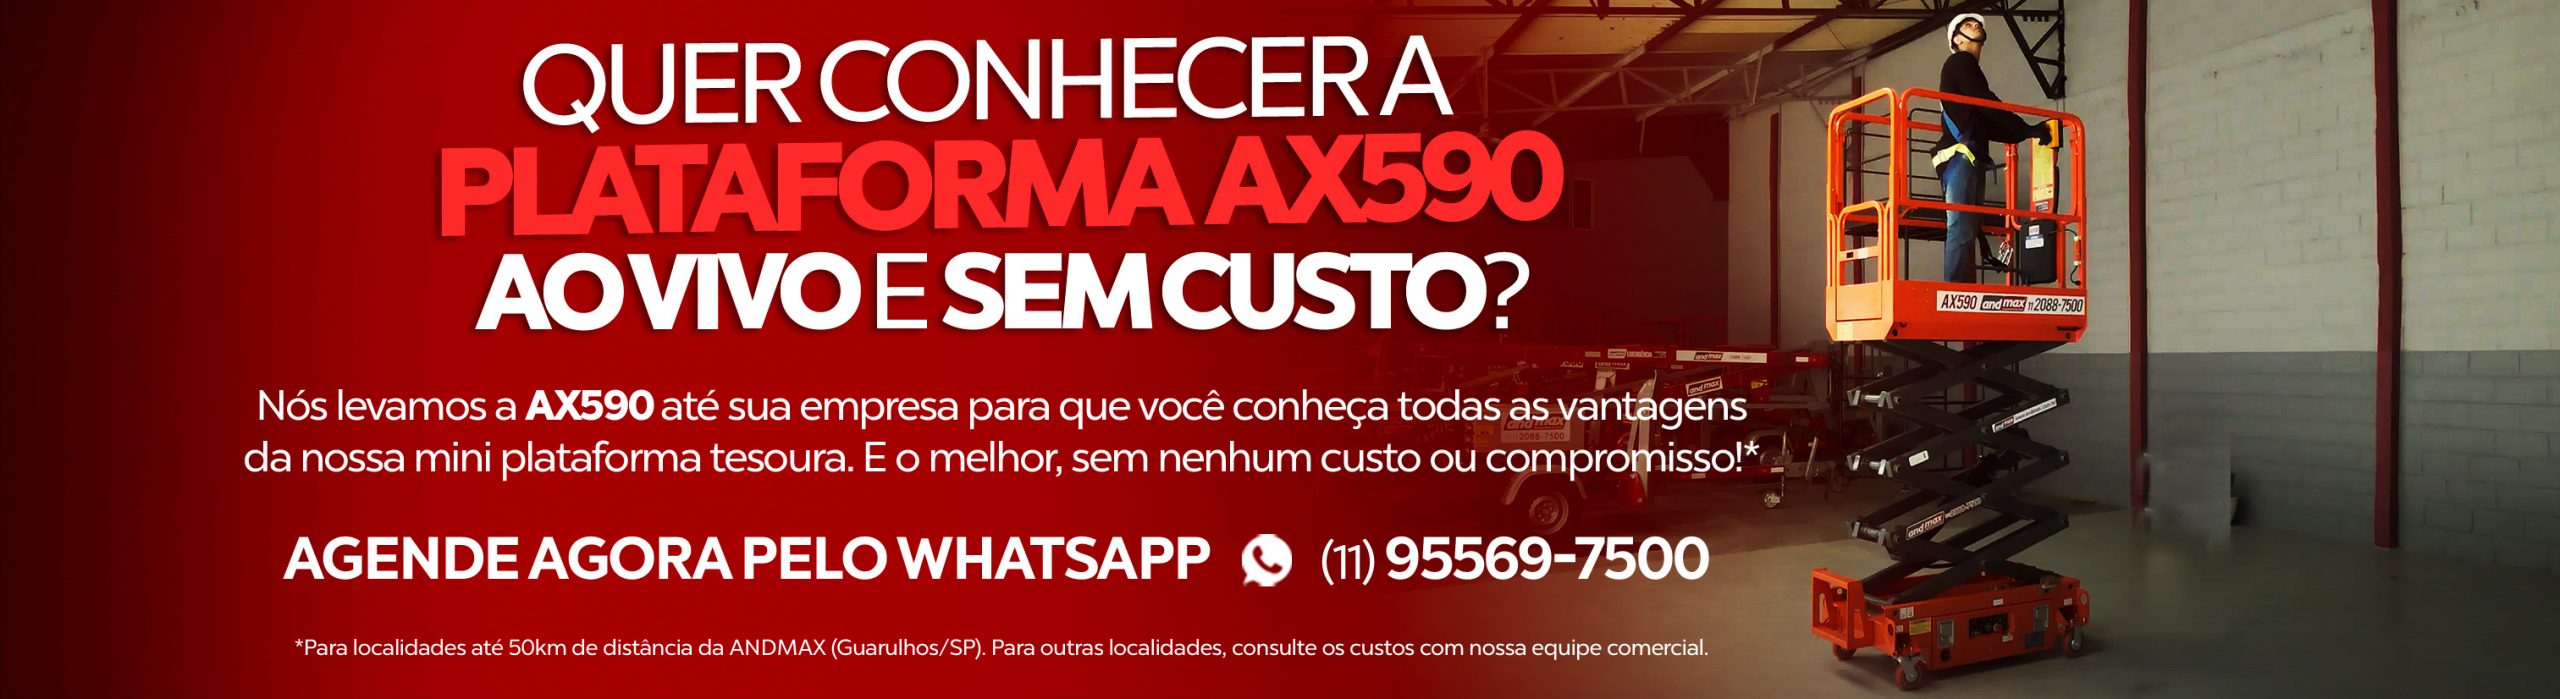 demonstracao_ax590_banner-scaled